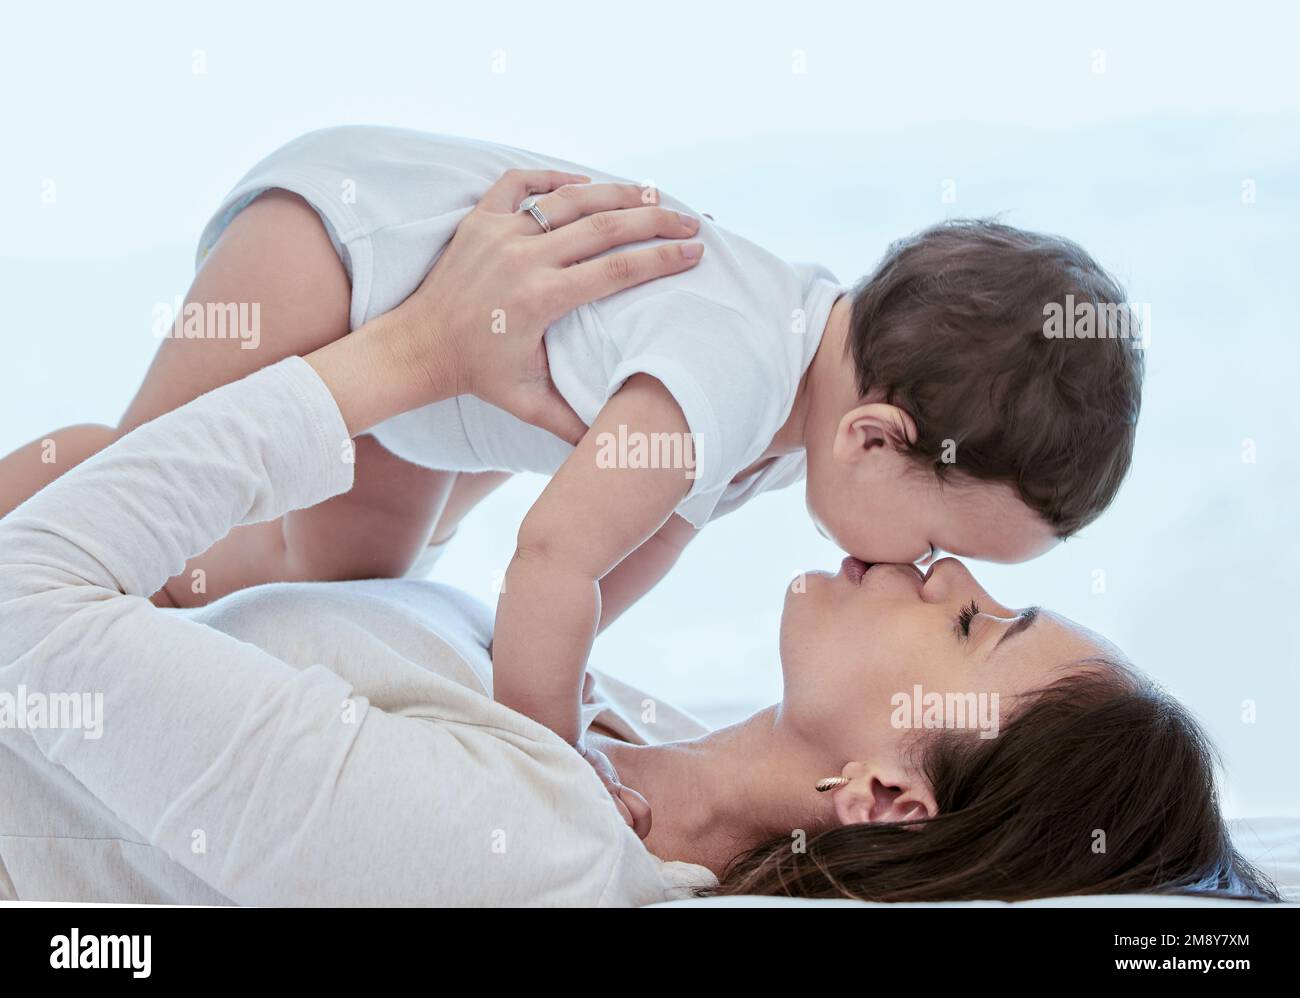 Cant stop kissing her. a young mother bonding with her baby at home. Stock Photo